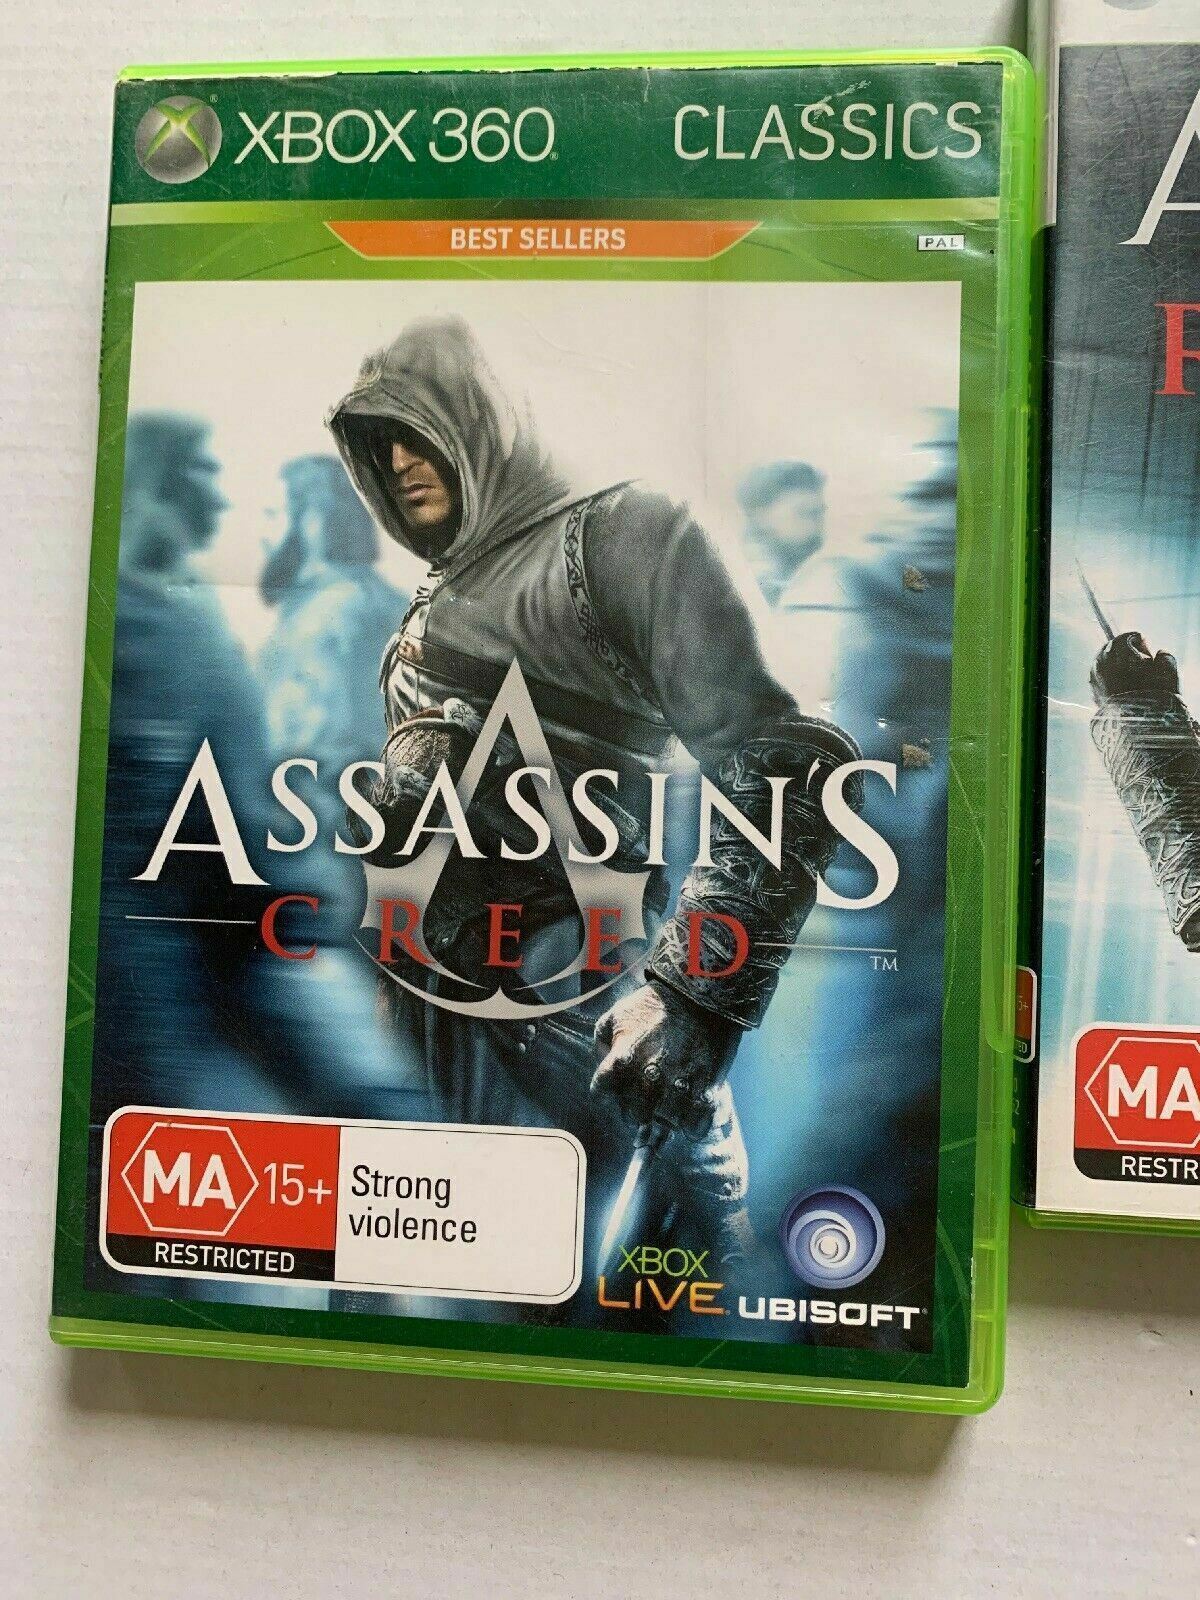 Assassin's Creed: 1 & Revelations + CD Soundtrack - Microsoft Xbox 360 PAL Game